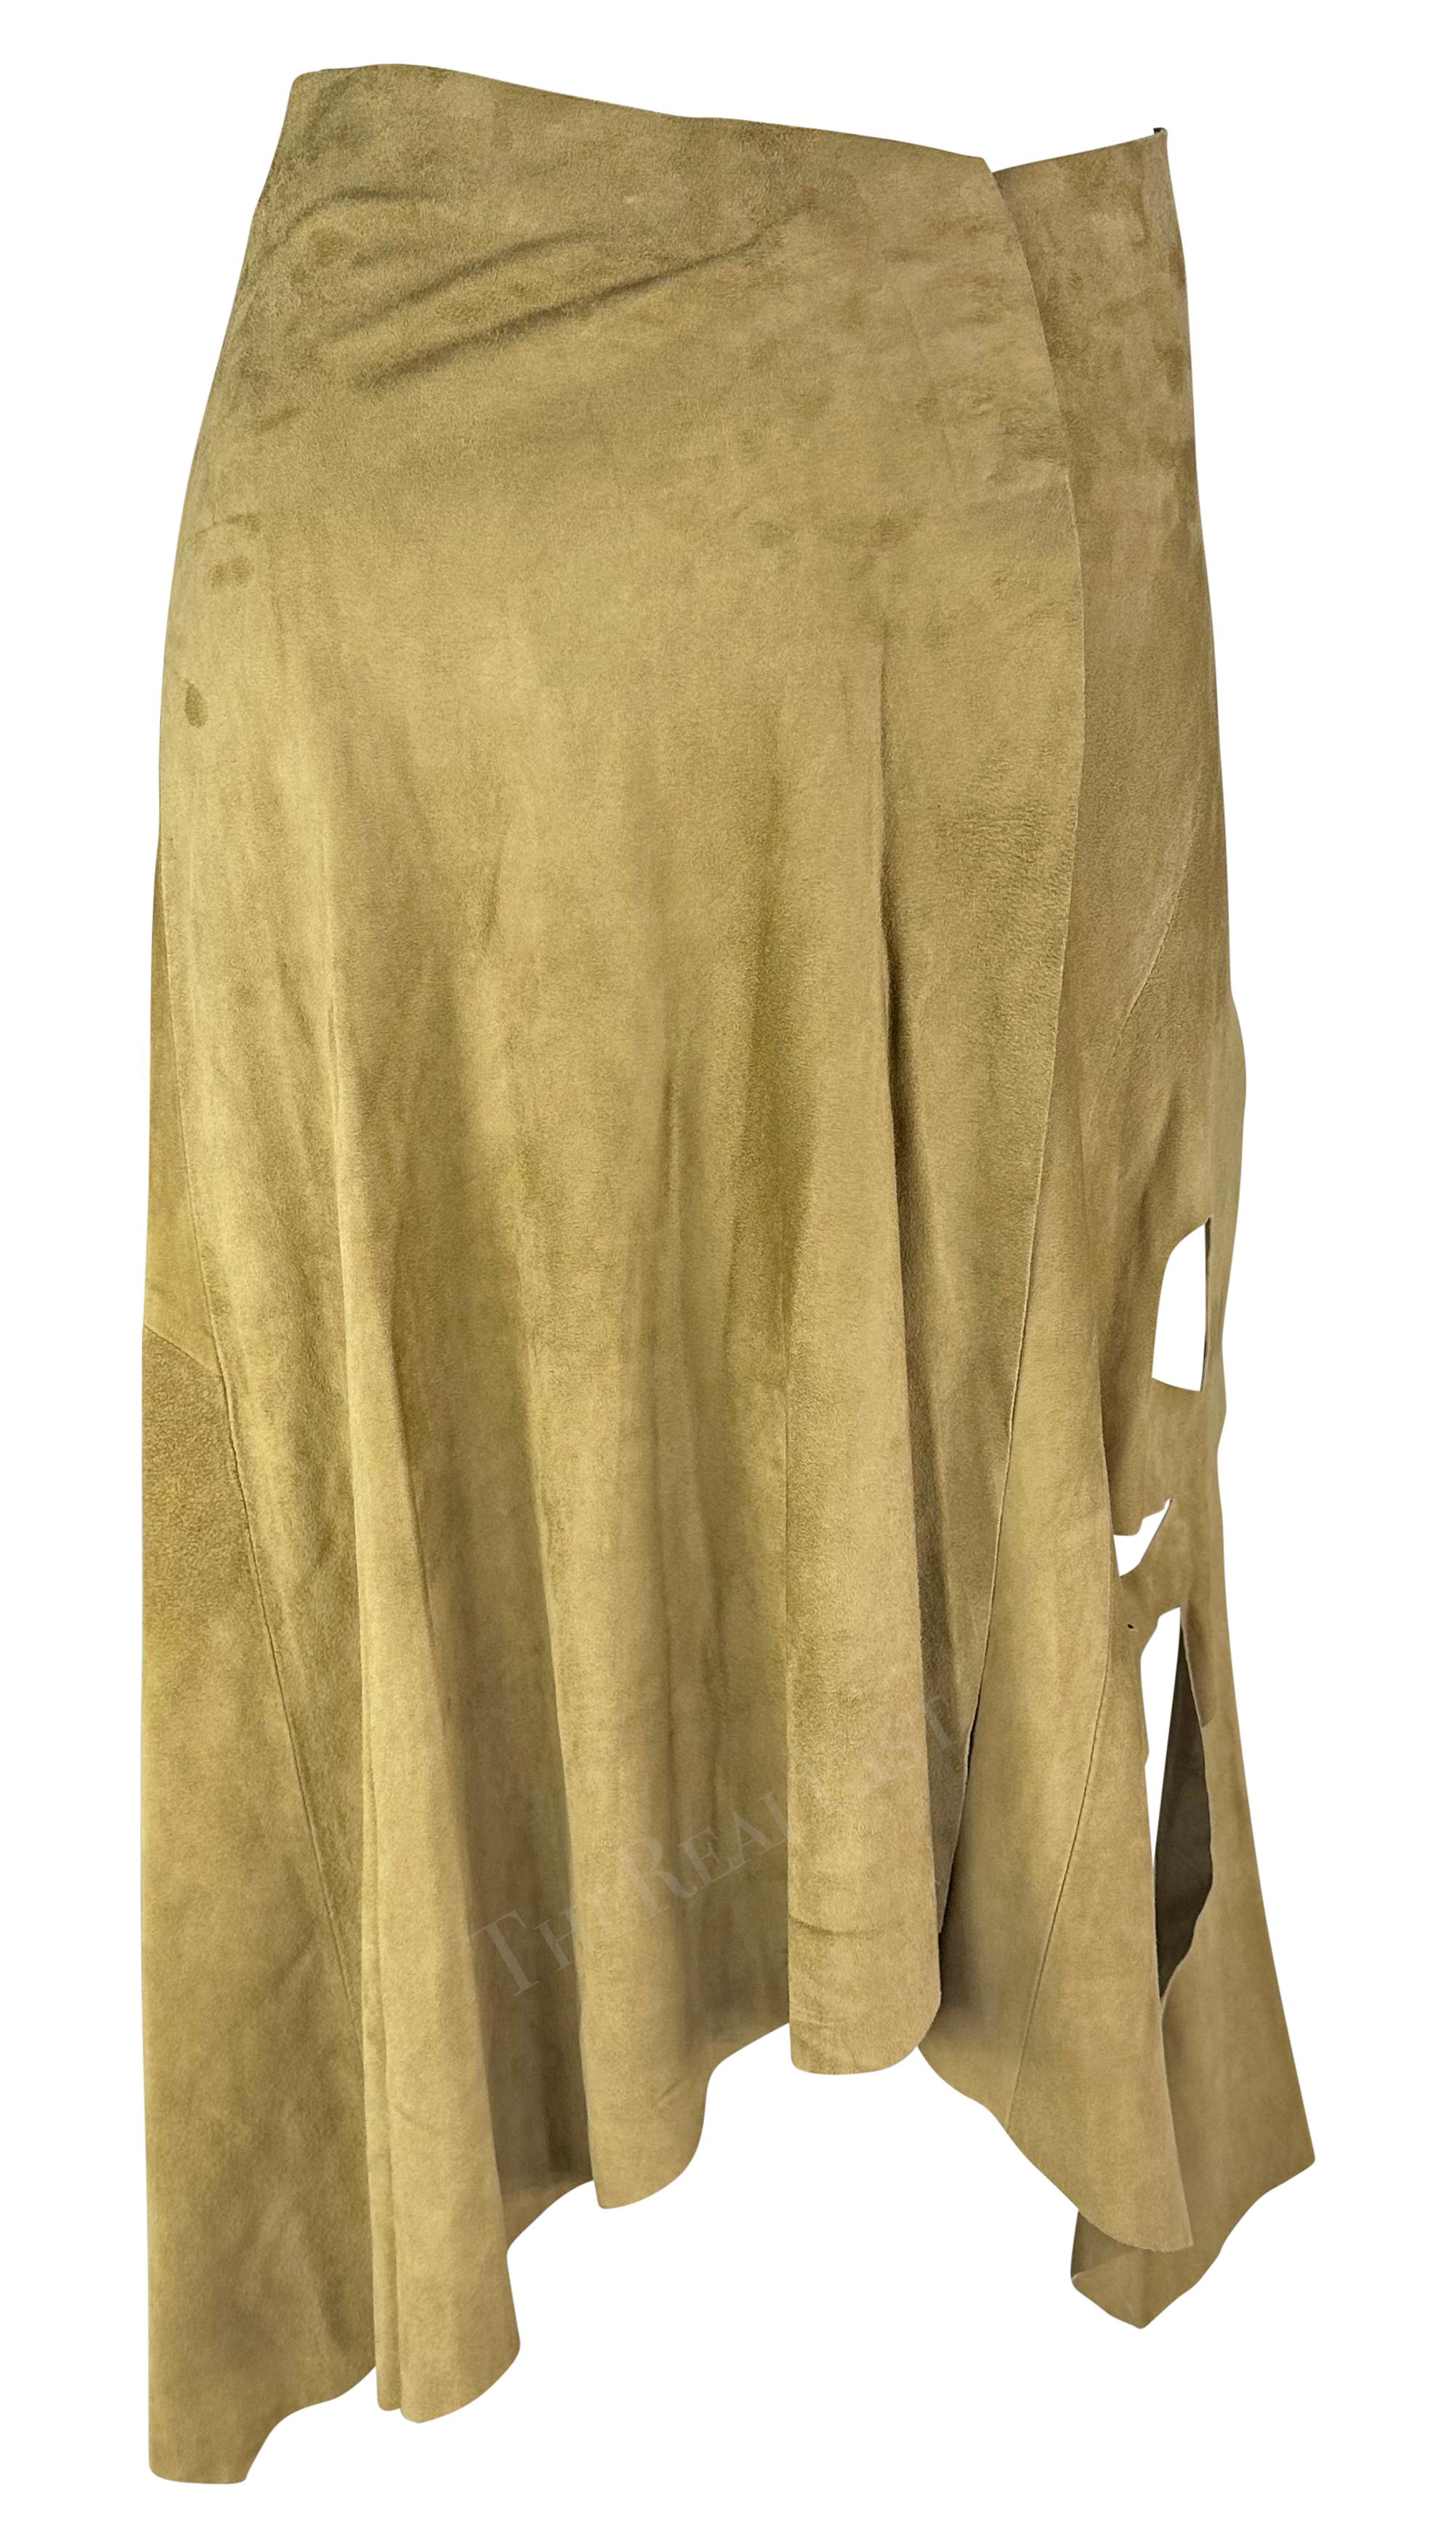 S/S 2002 Gucci by Tom Ford Tan Suede Floral Cutout Flare Wrap Skirt For Sale 1